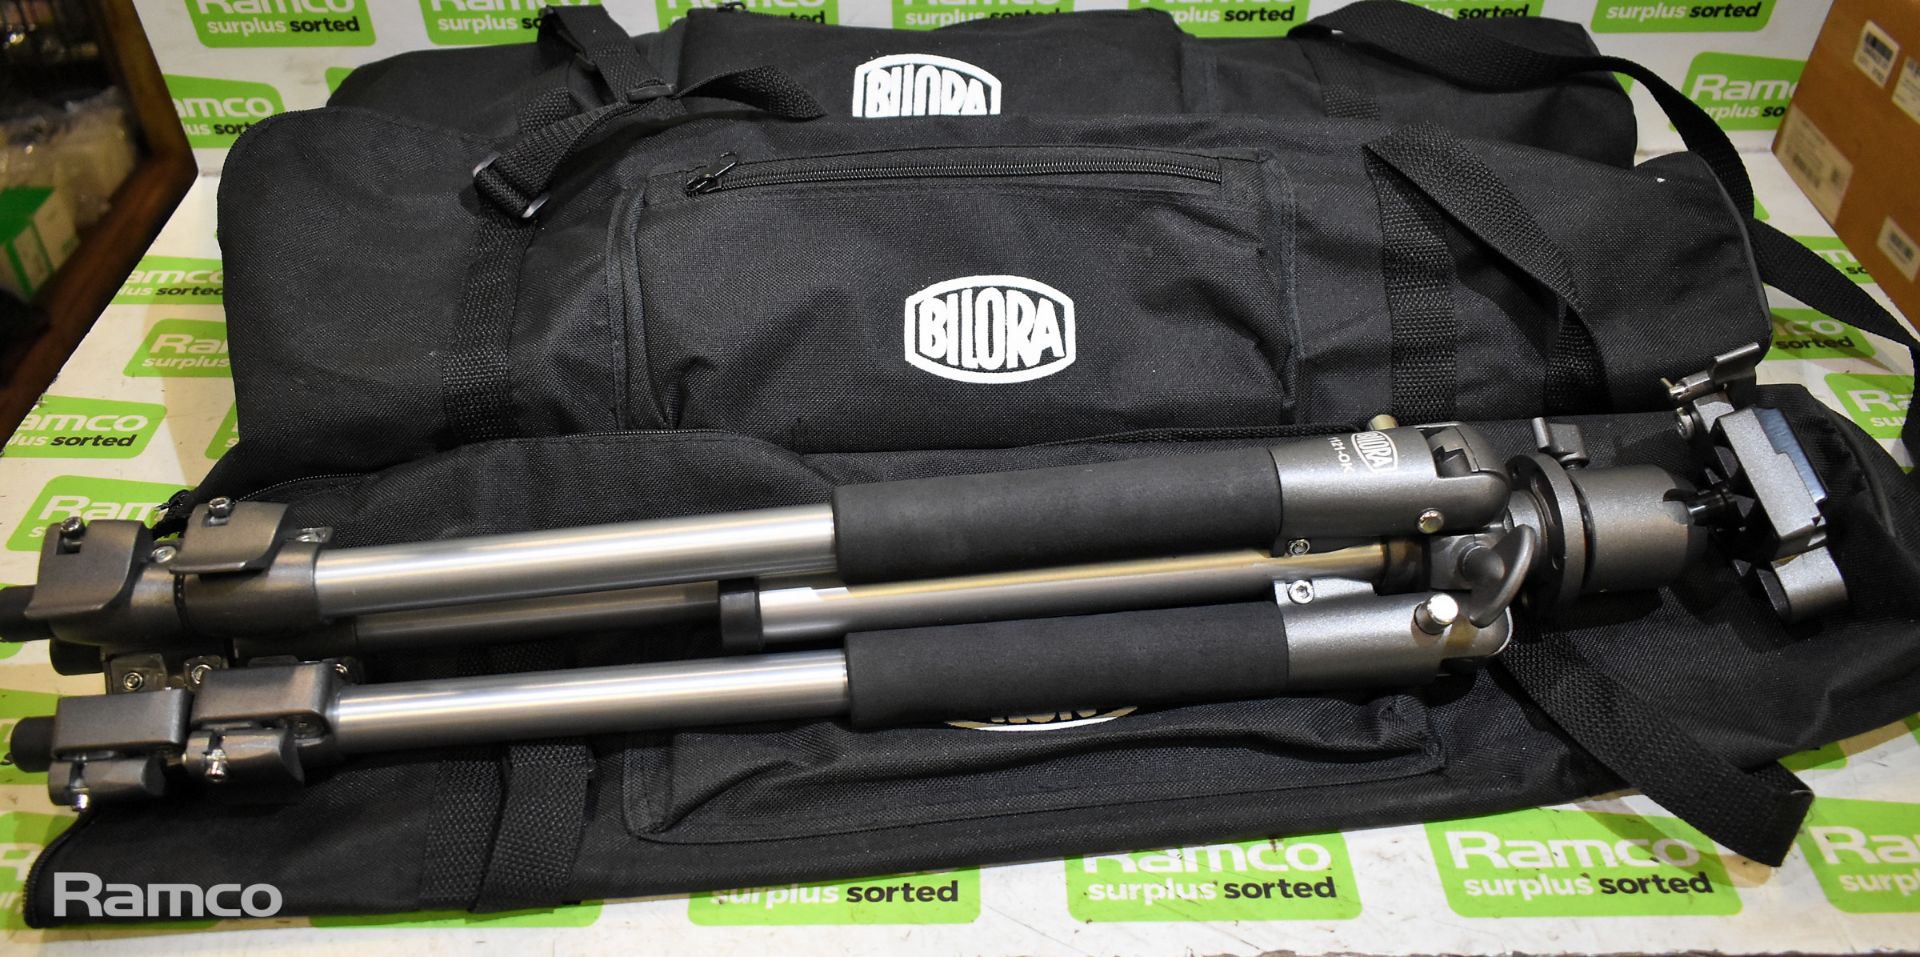 3x Bilora 1121-OK 59-143cm tripods with carry case - Image 2 of 7